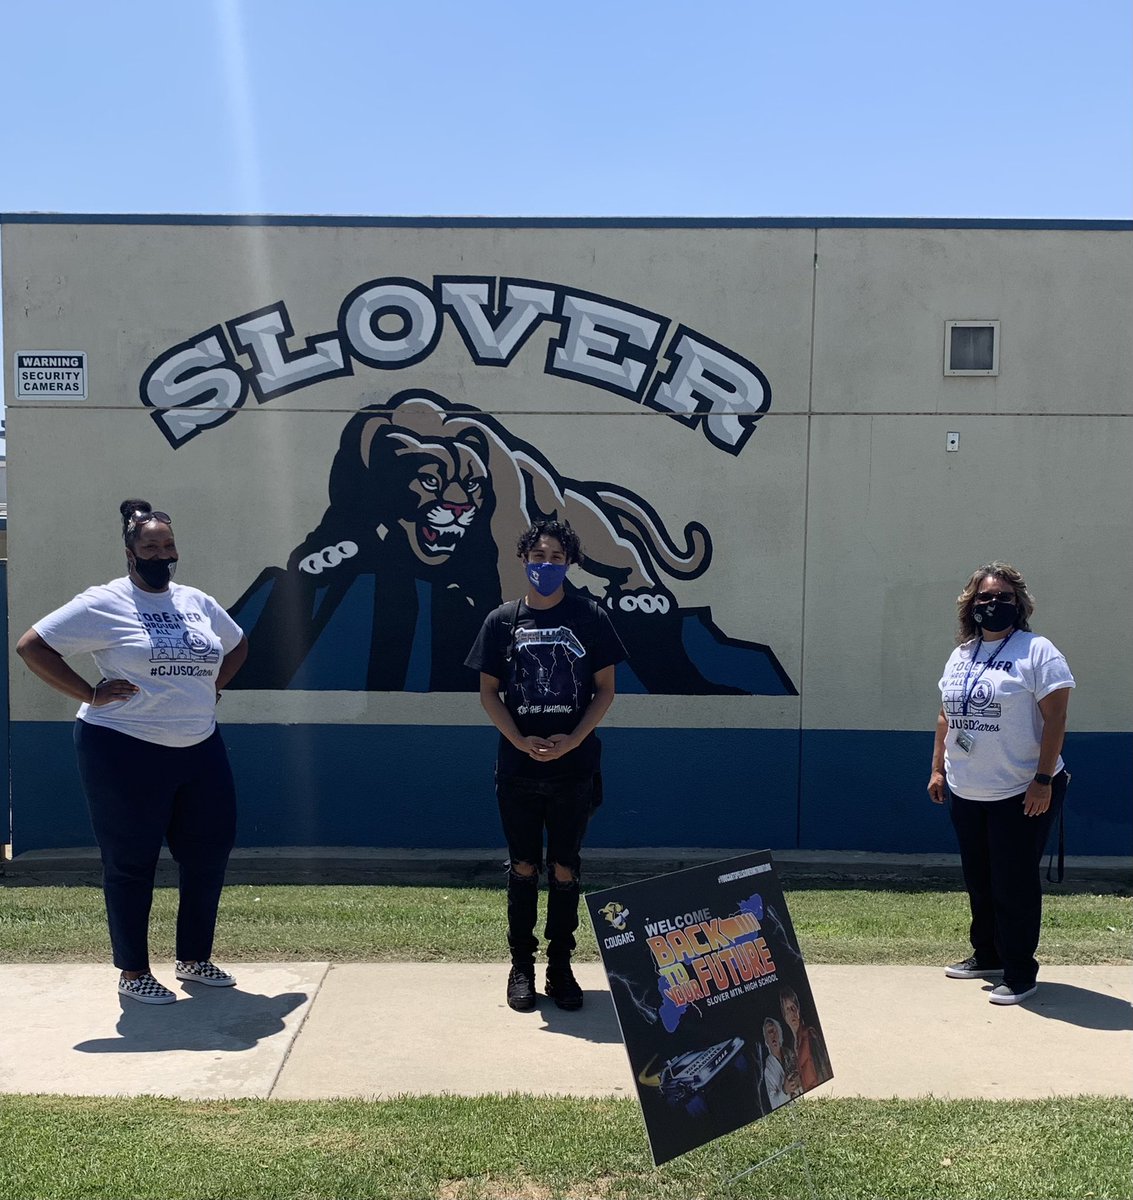 Welcome back Slover Mountain High School! #cjusdcares